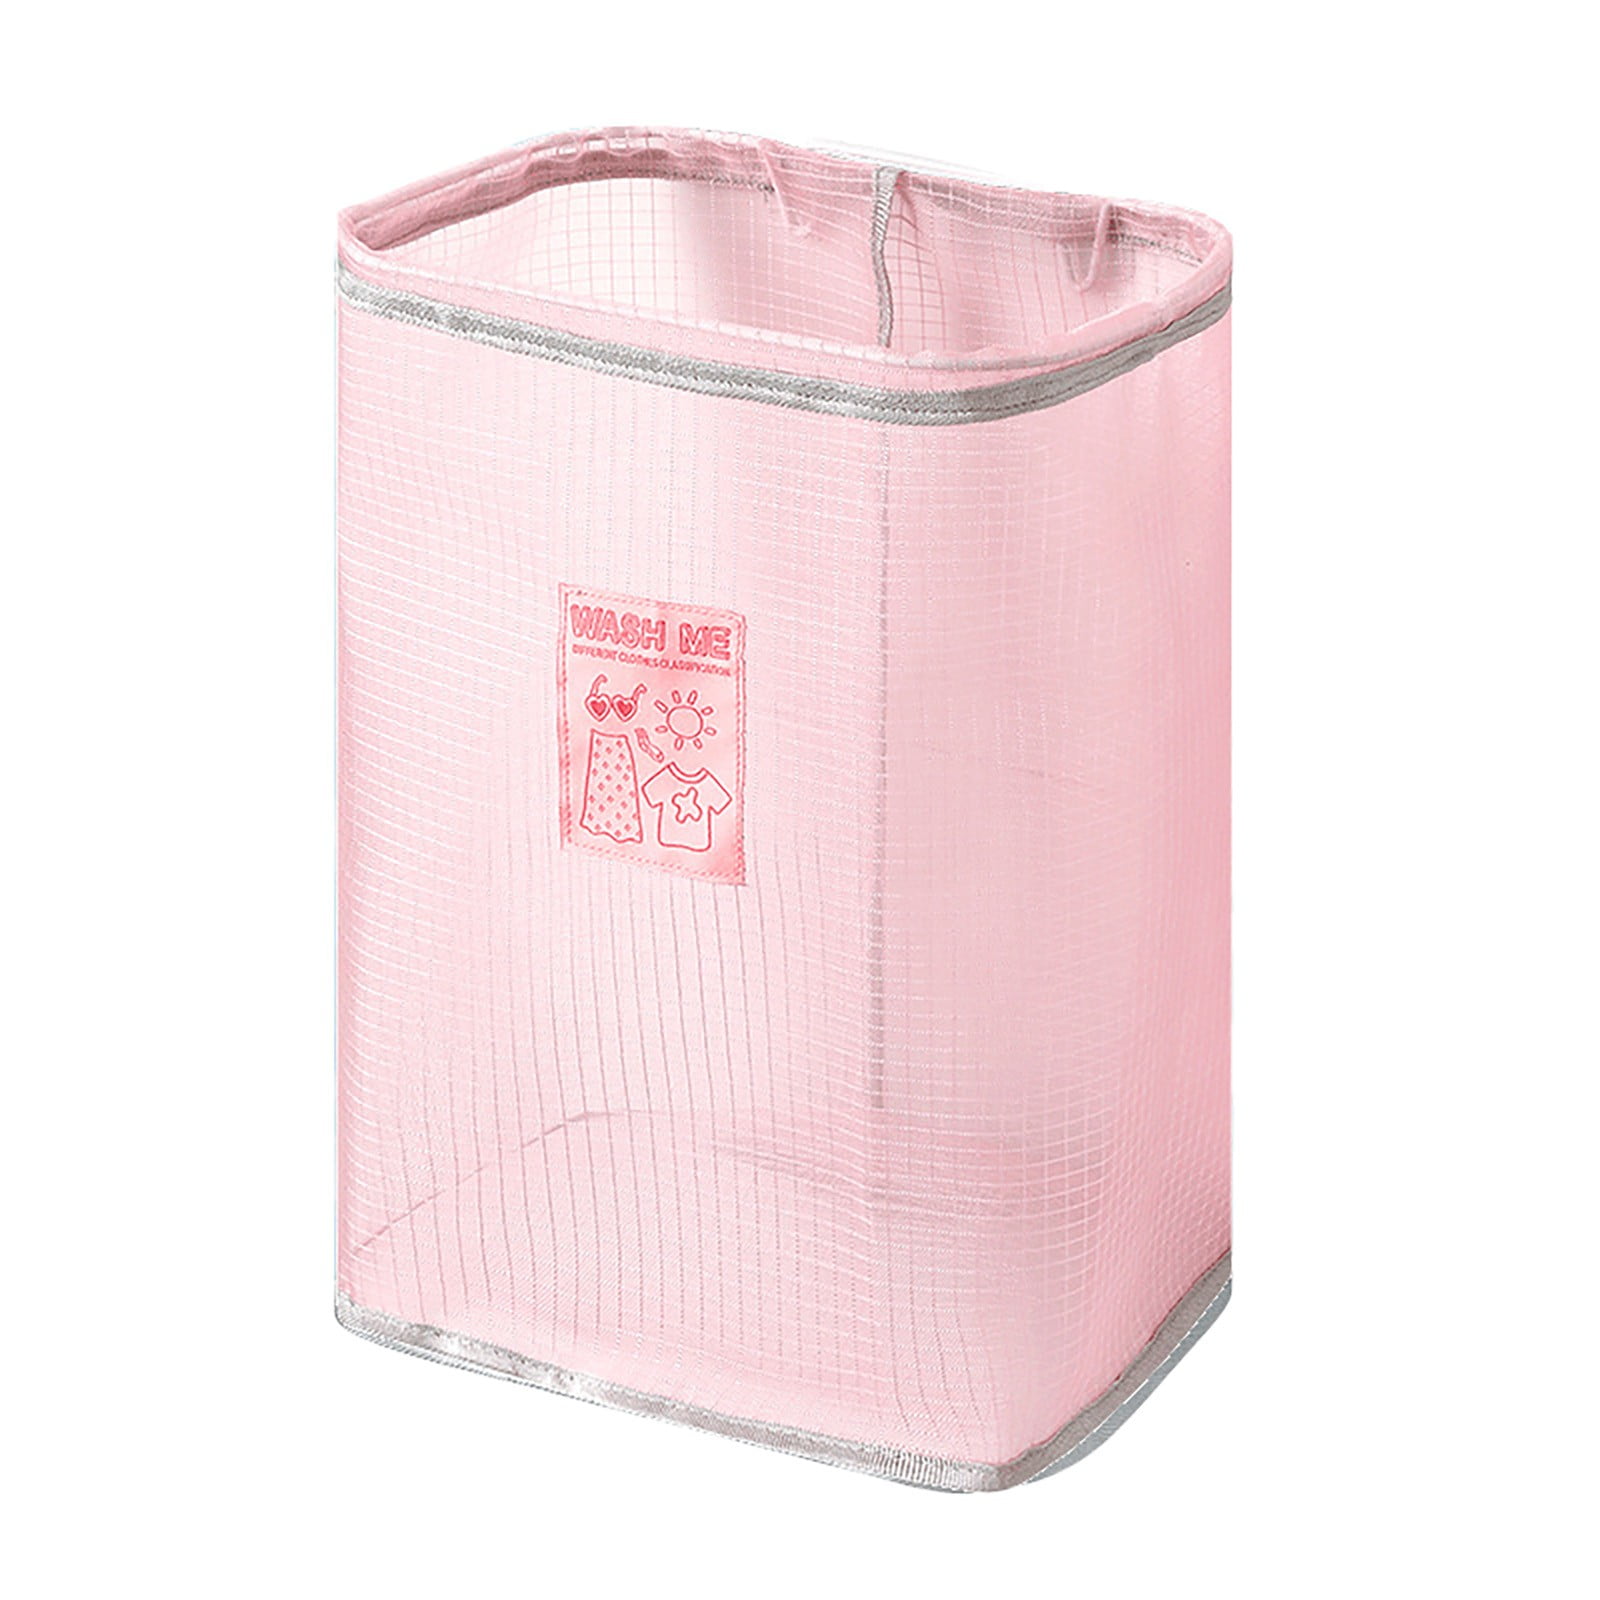 Details about   Wall Mounted Laundry Basket Foldable Dirty Clothe Bathroom Storage Organizer Bag 